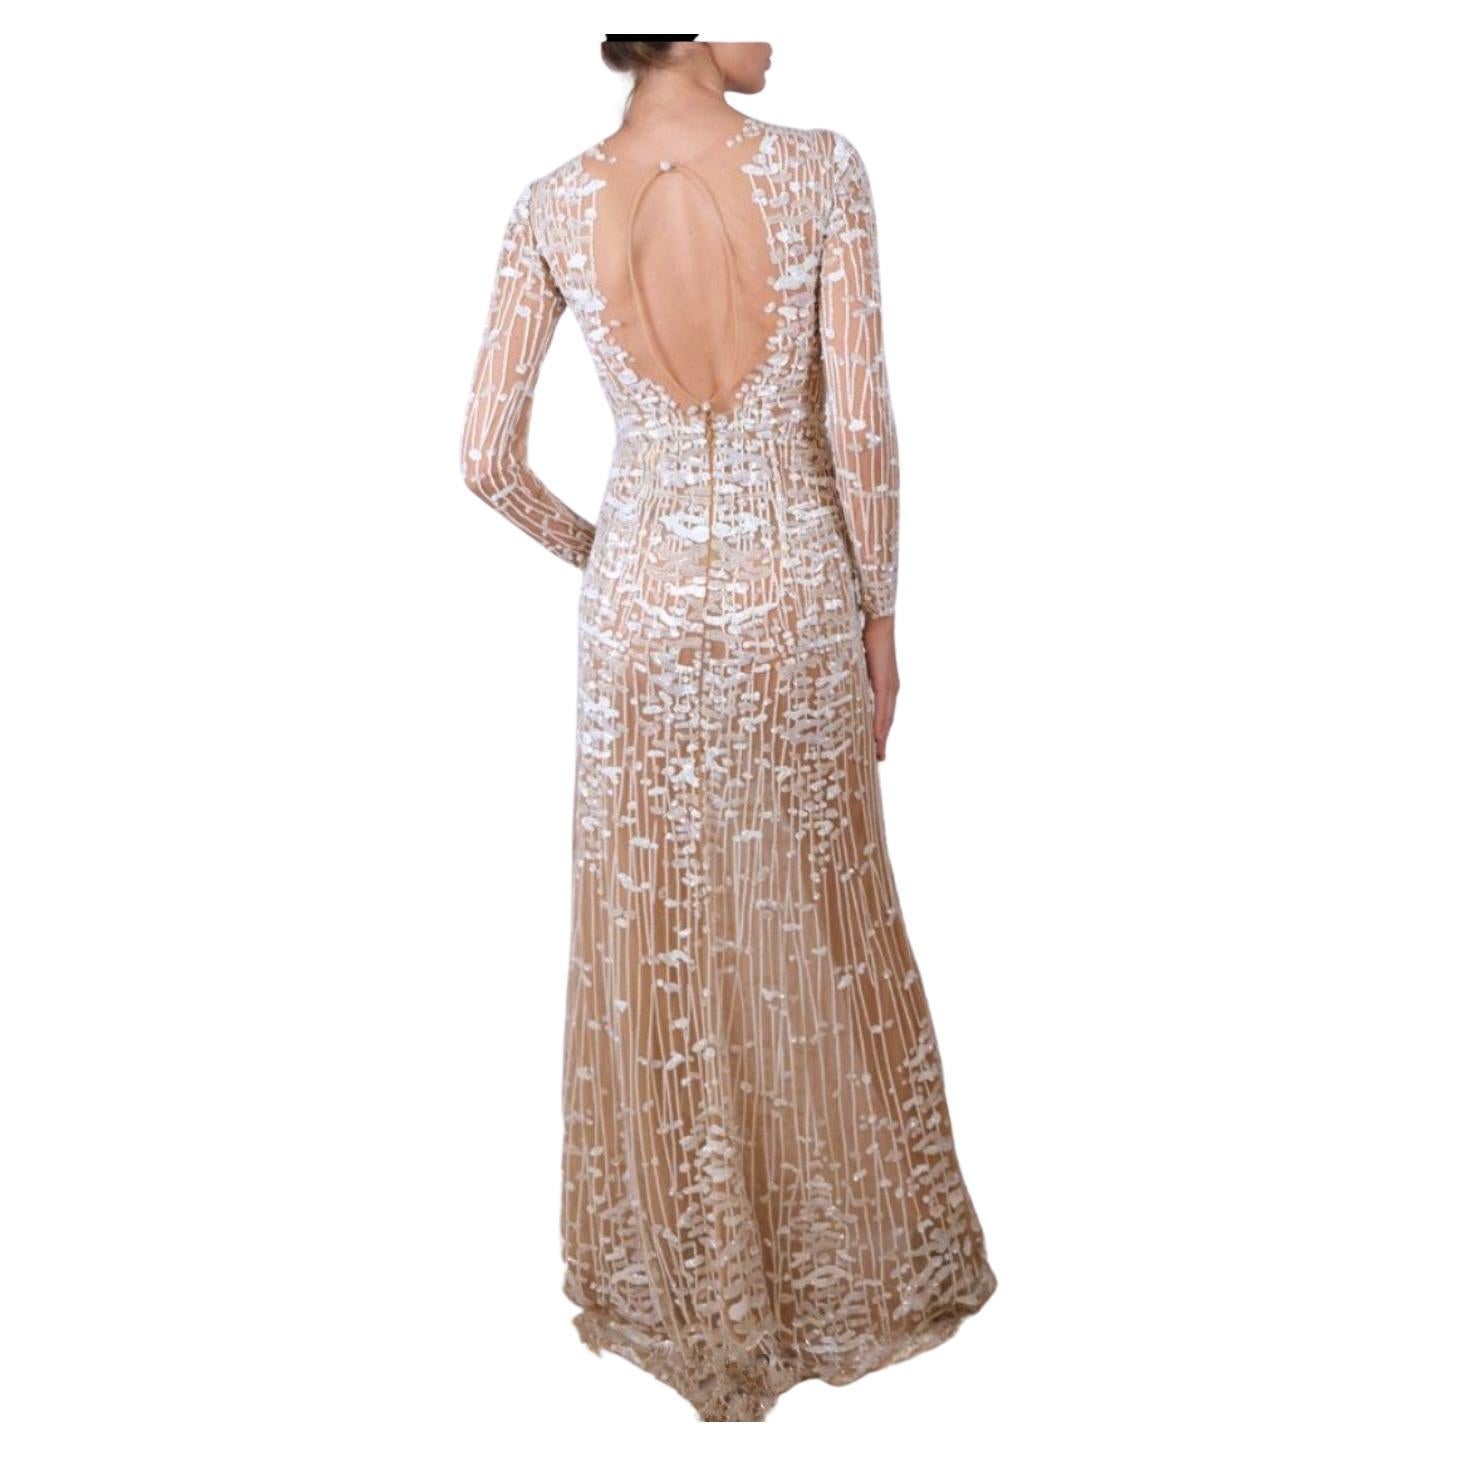 2014 Zuhair Murad Nude Embellished Tulle Evening Gown Look#48 1